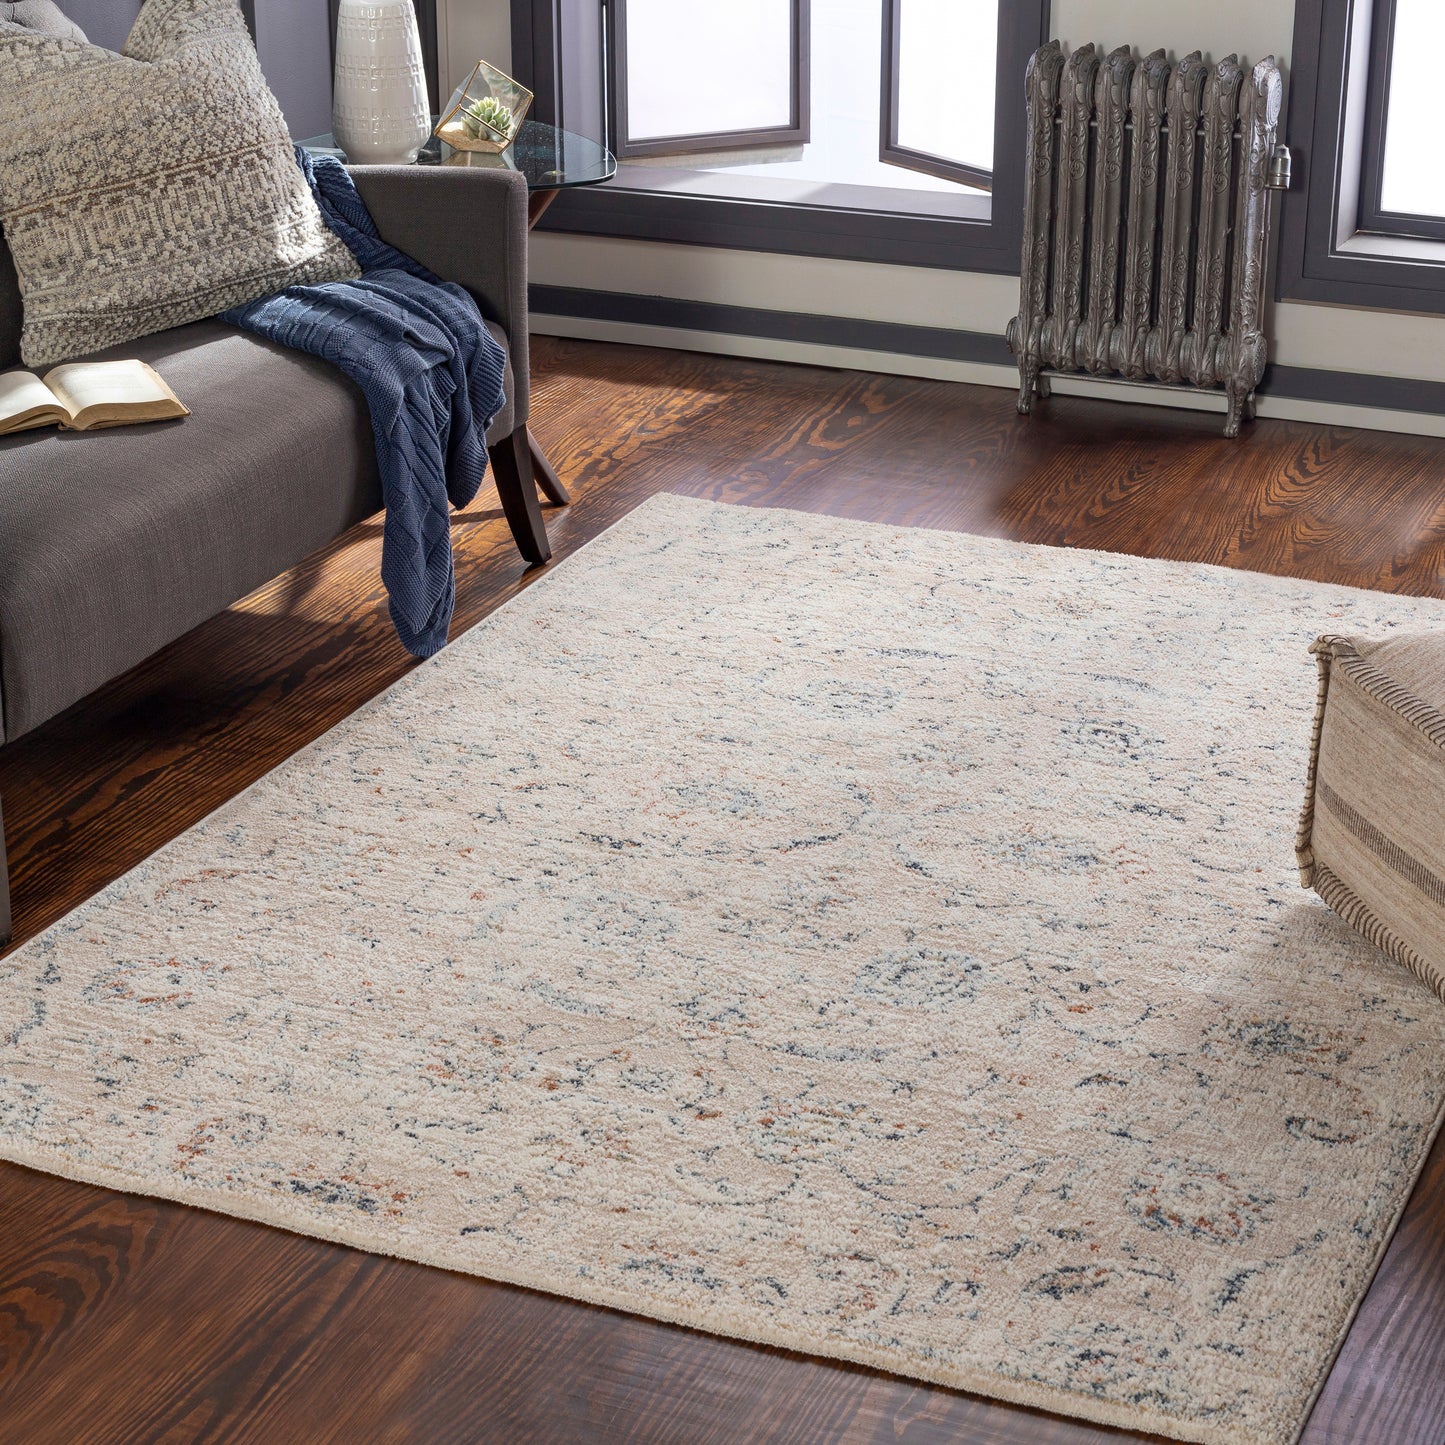 Amore 29630 Machine Woven Synthetic Blend Indoor Area Rug by Surya Rugs